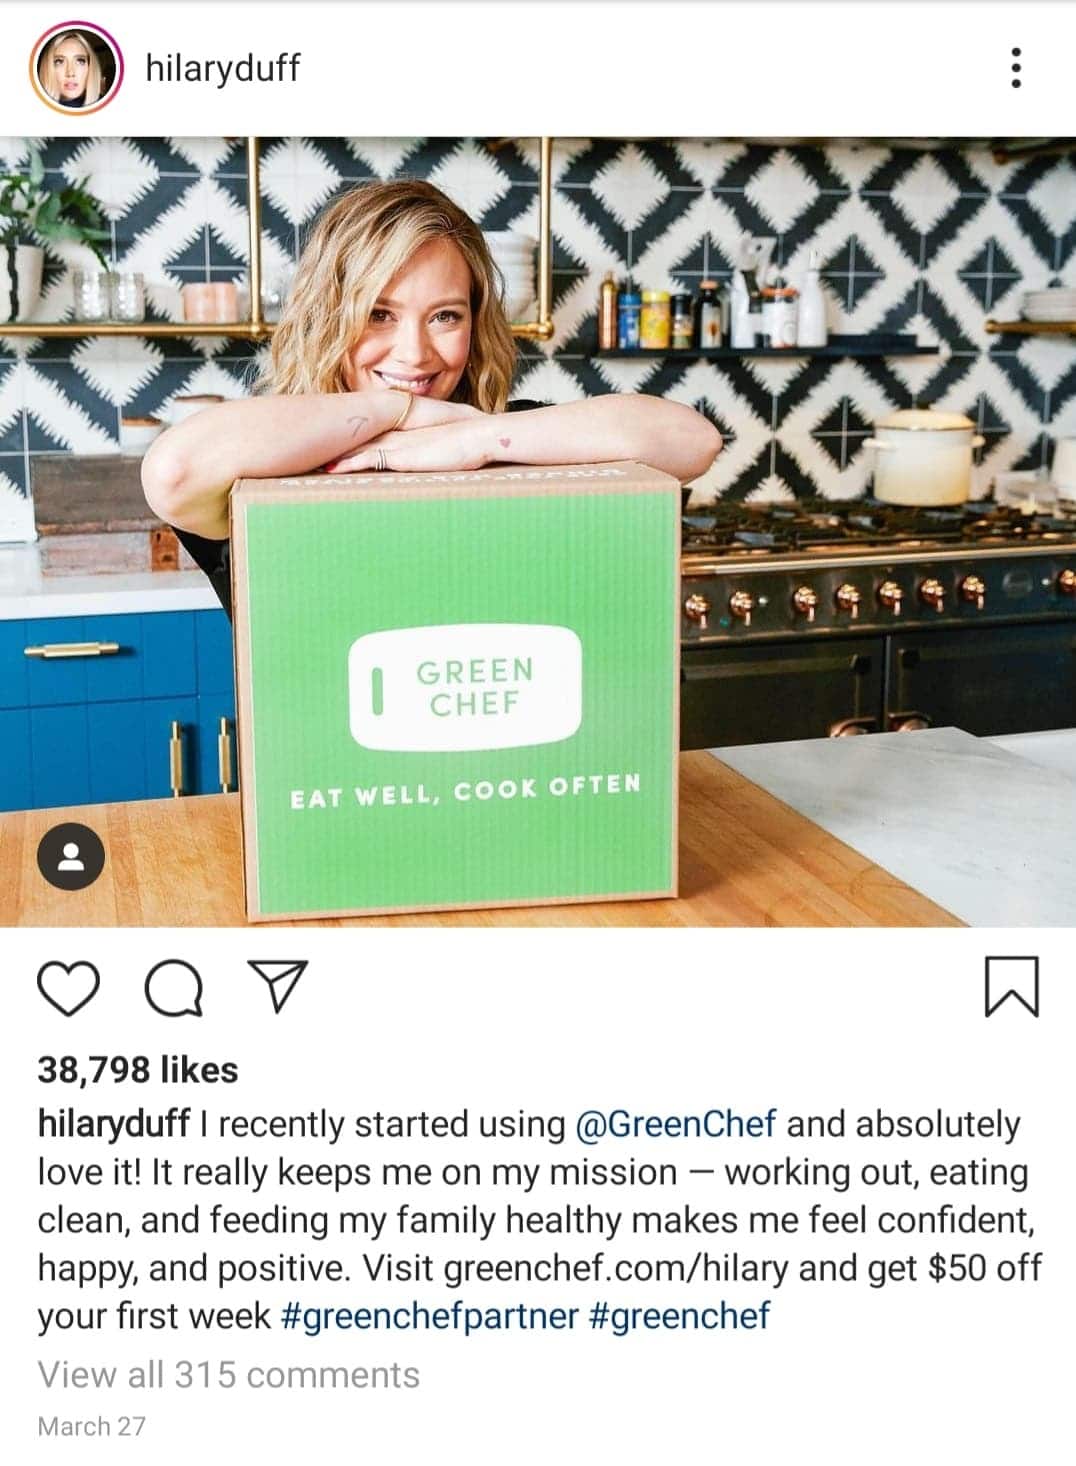 Another stellar example is this post from celebrity Hilary Duff. While she reached celebrity status, thanks to her popular TV shows and music career, she’s still considered one of the “real” celebrities that people like to identify with